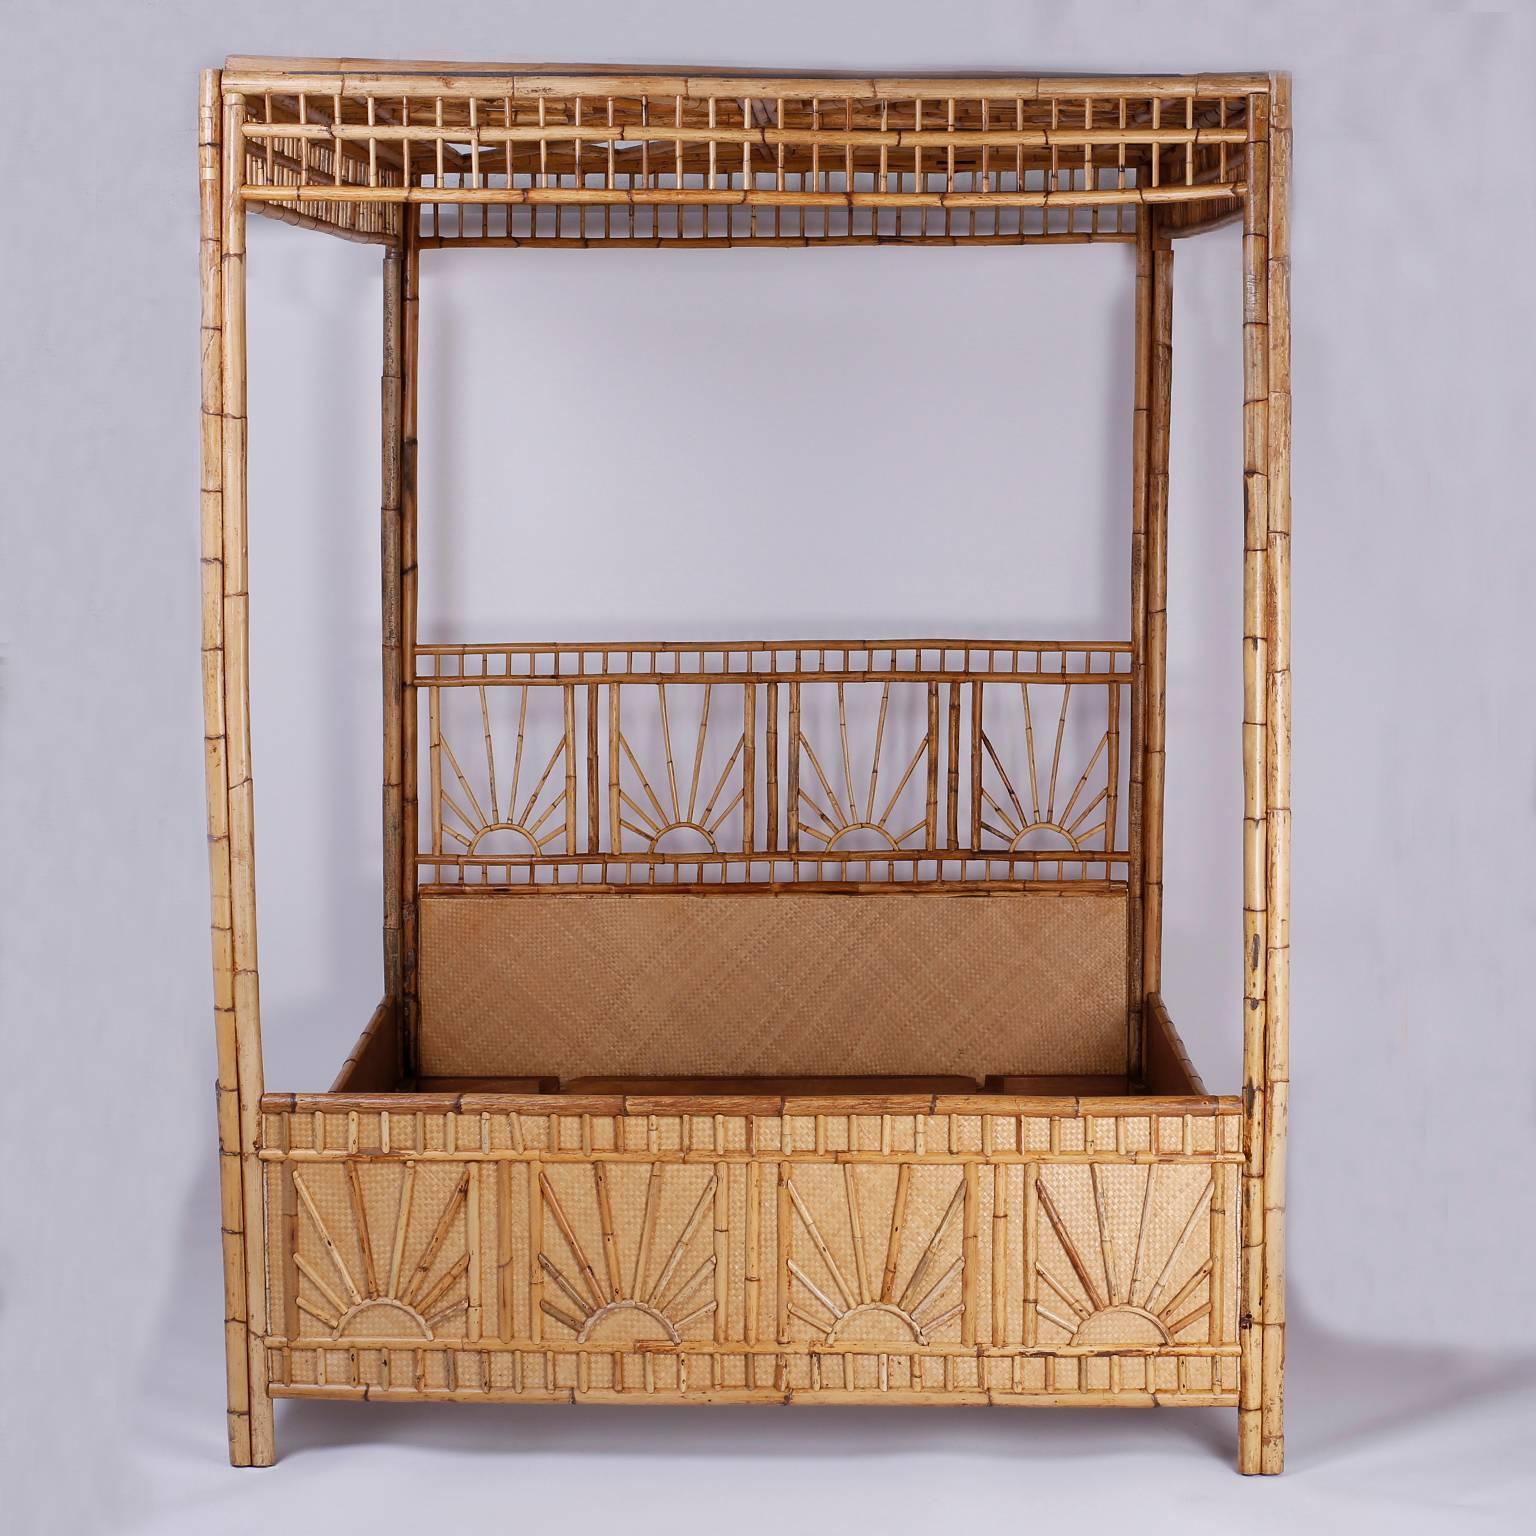 Transporting queen-size bamboo and grasscloth canopy bed with a strong, yet graceful stance and a romantic spirit, decorated with a sunup, sun down motif.